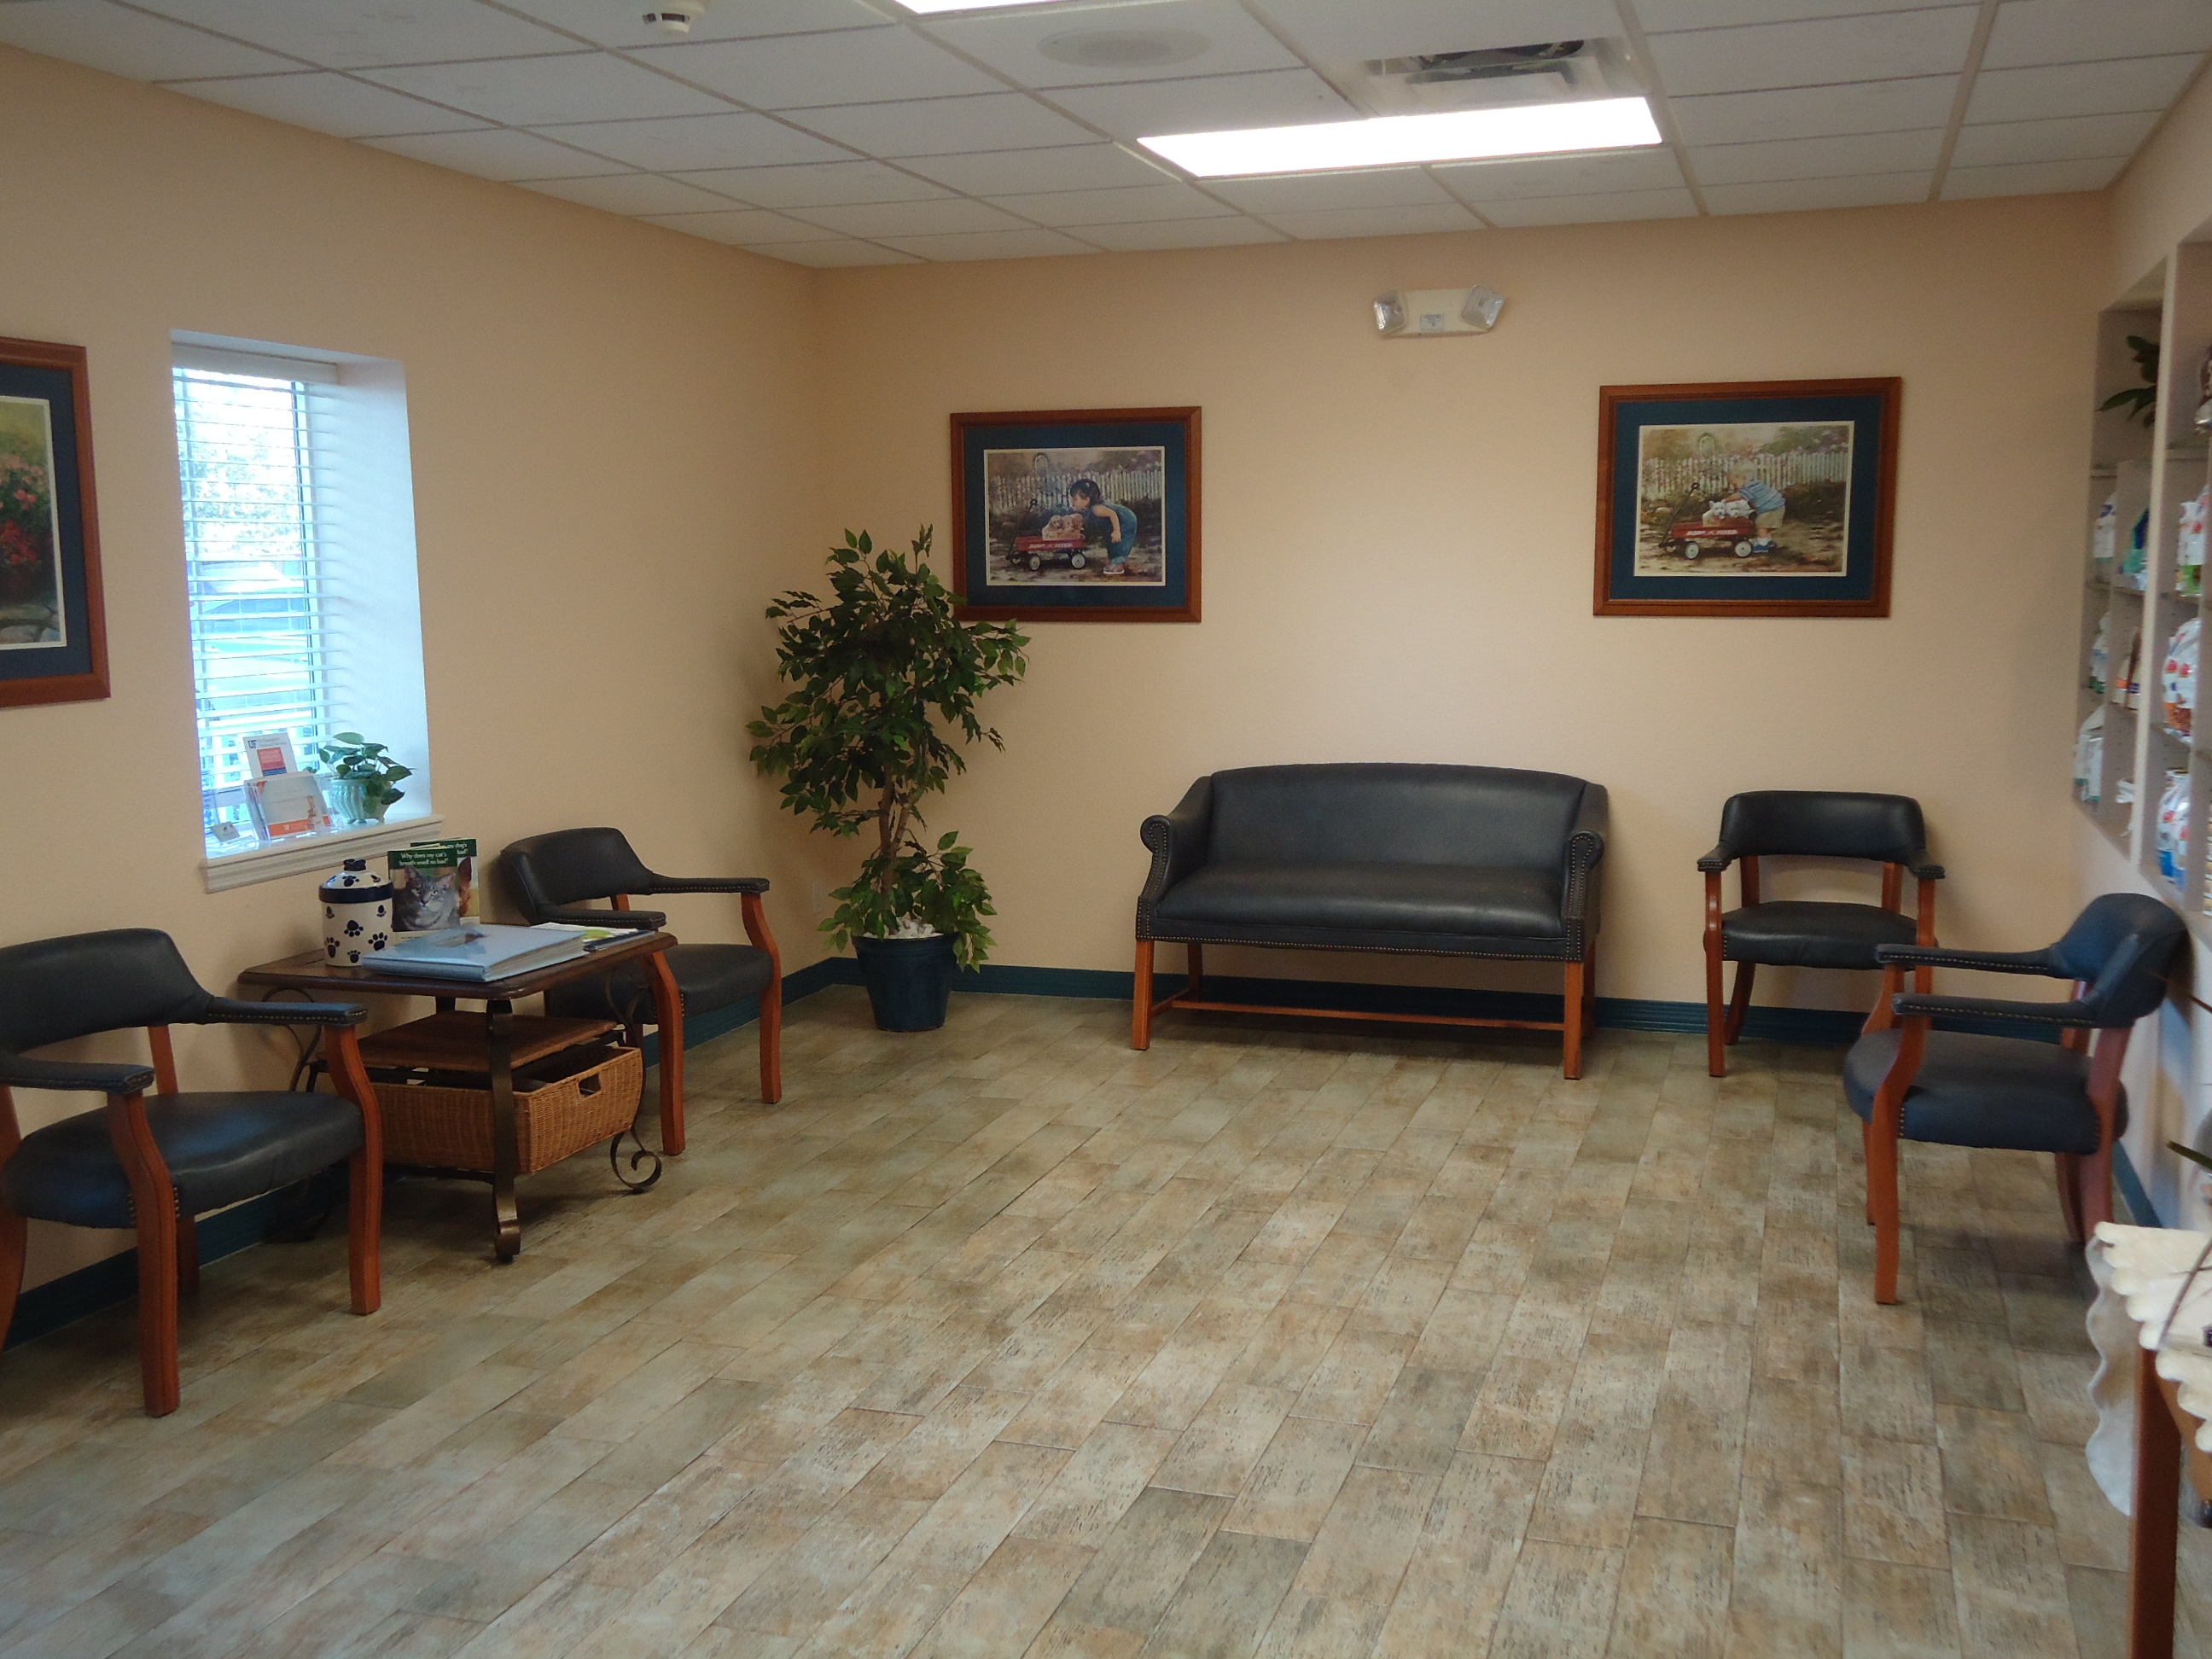 Our Waiting Area